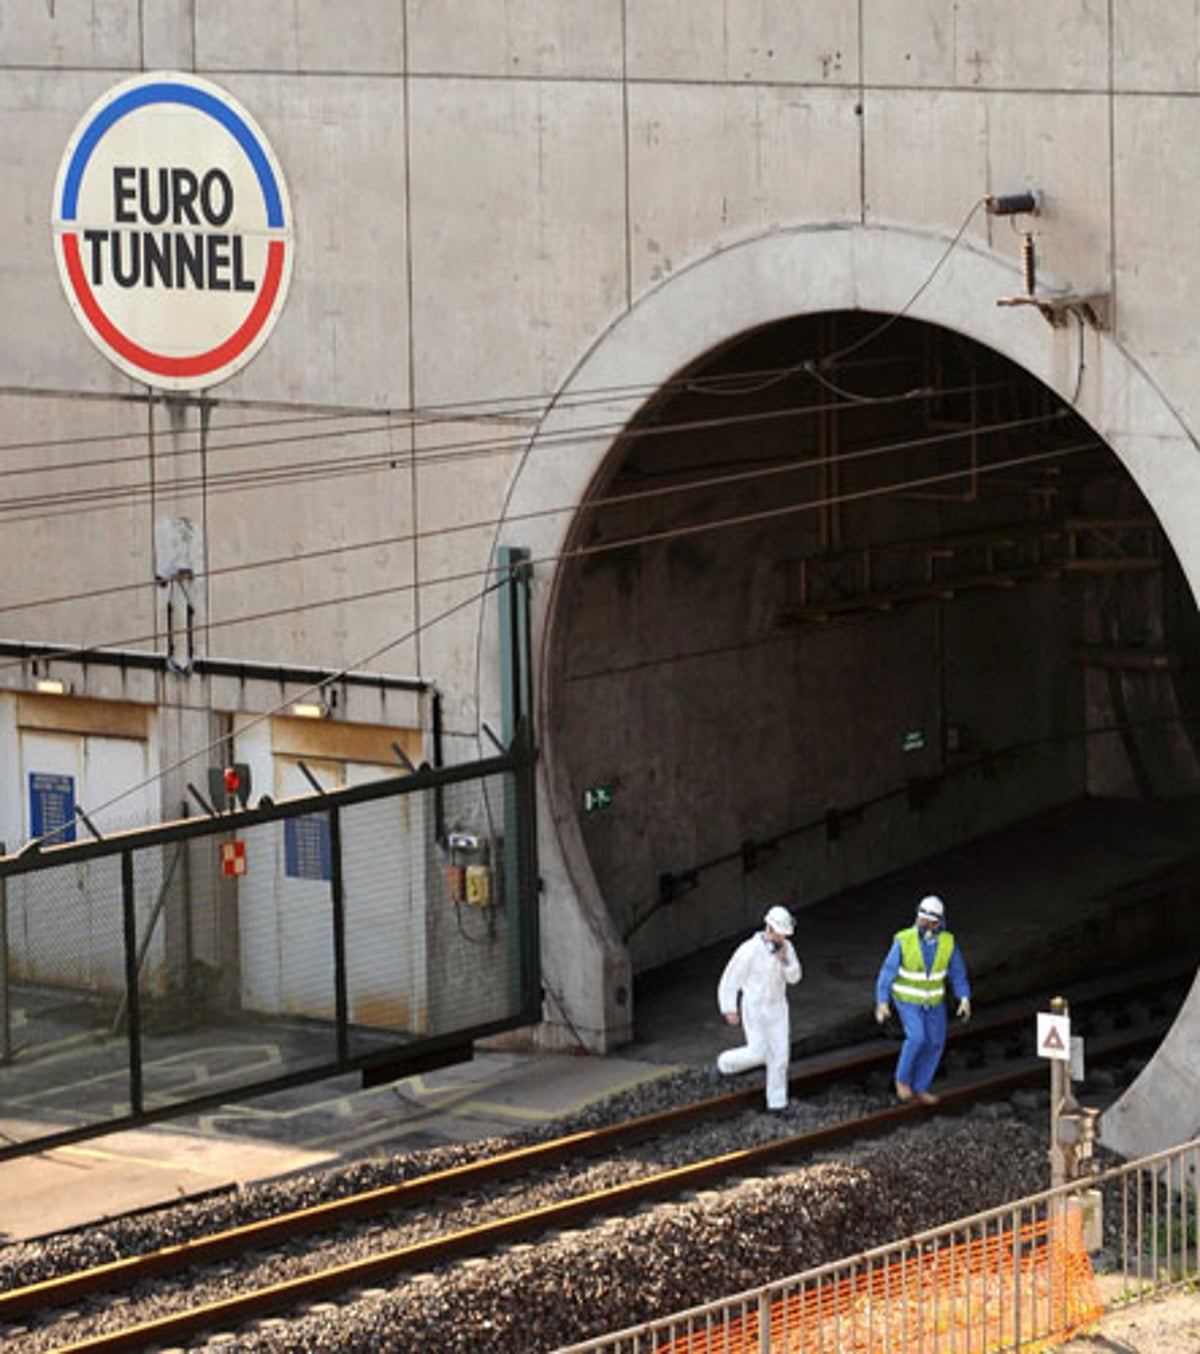 channel tunnel entrance